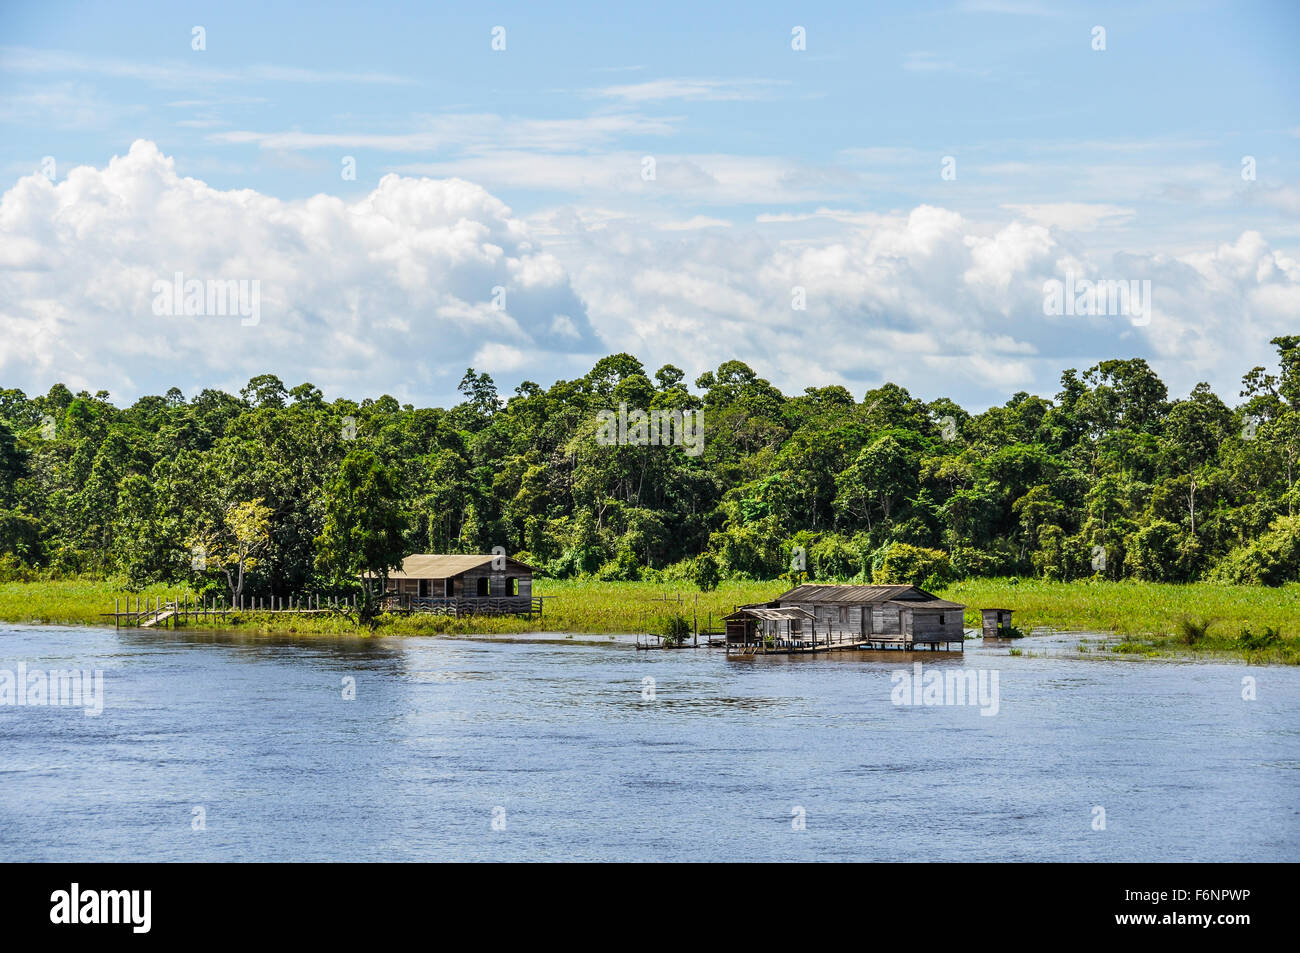 Flooded forest as seen from the boat on the Amazon River in Brazil. Stock Photo